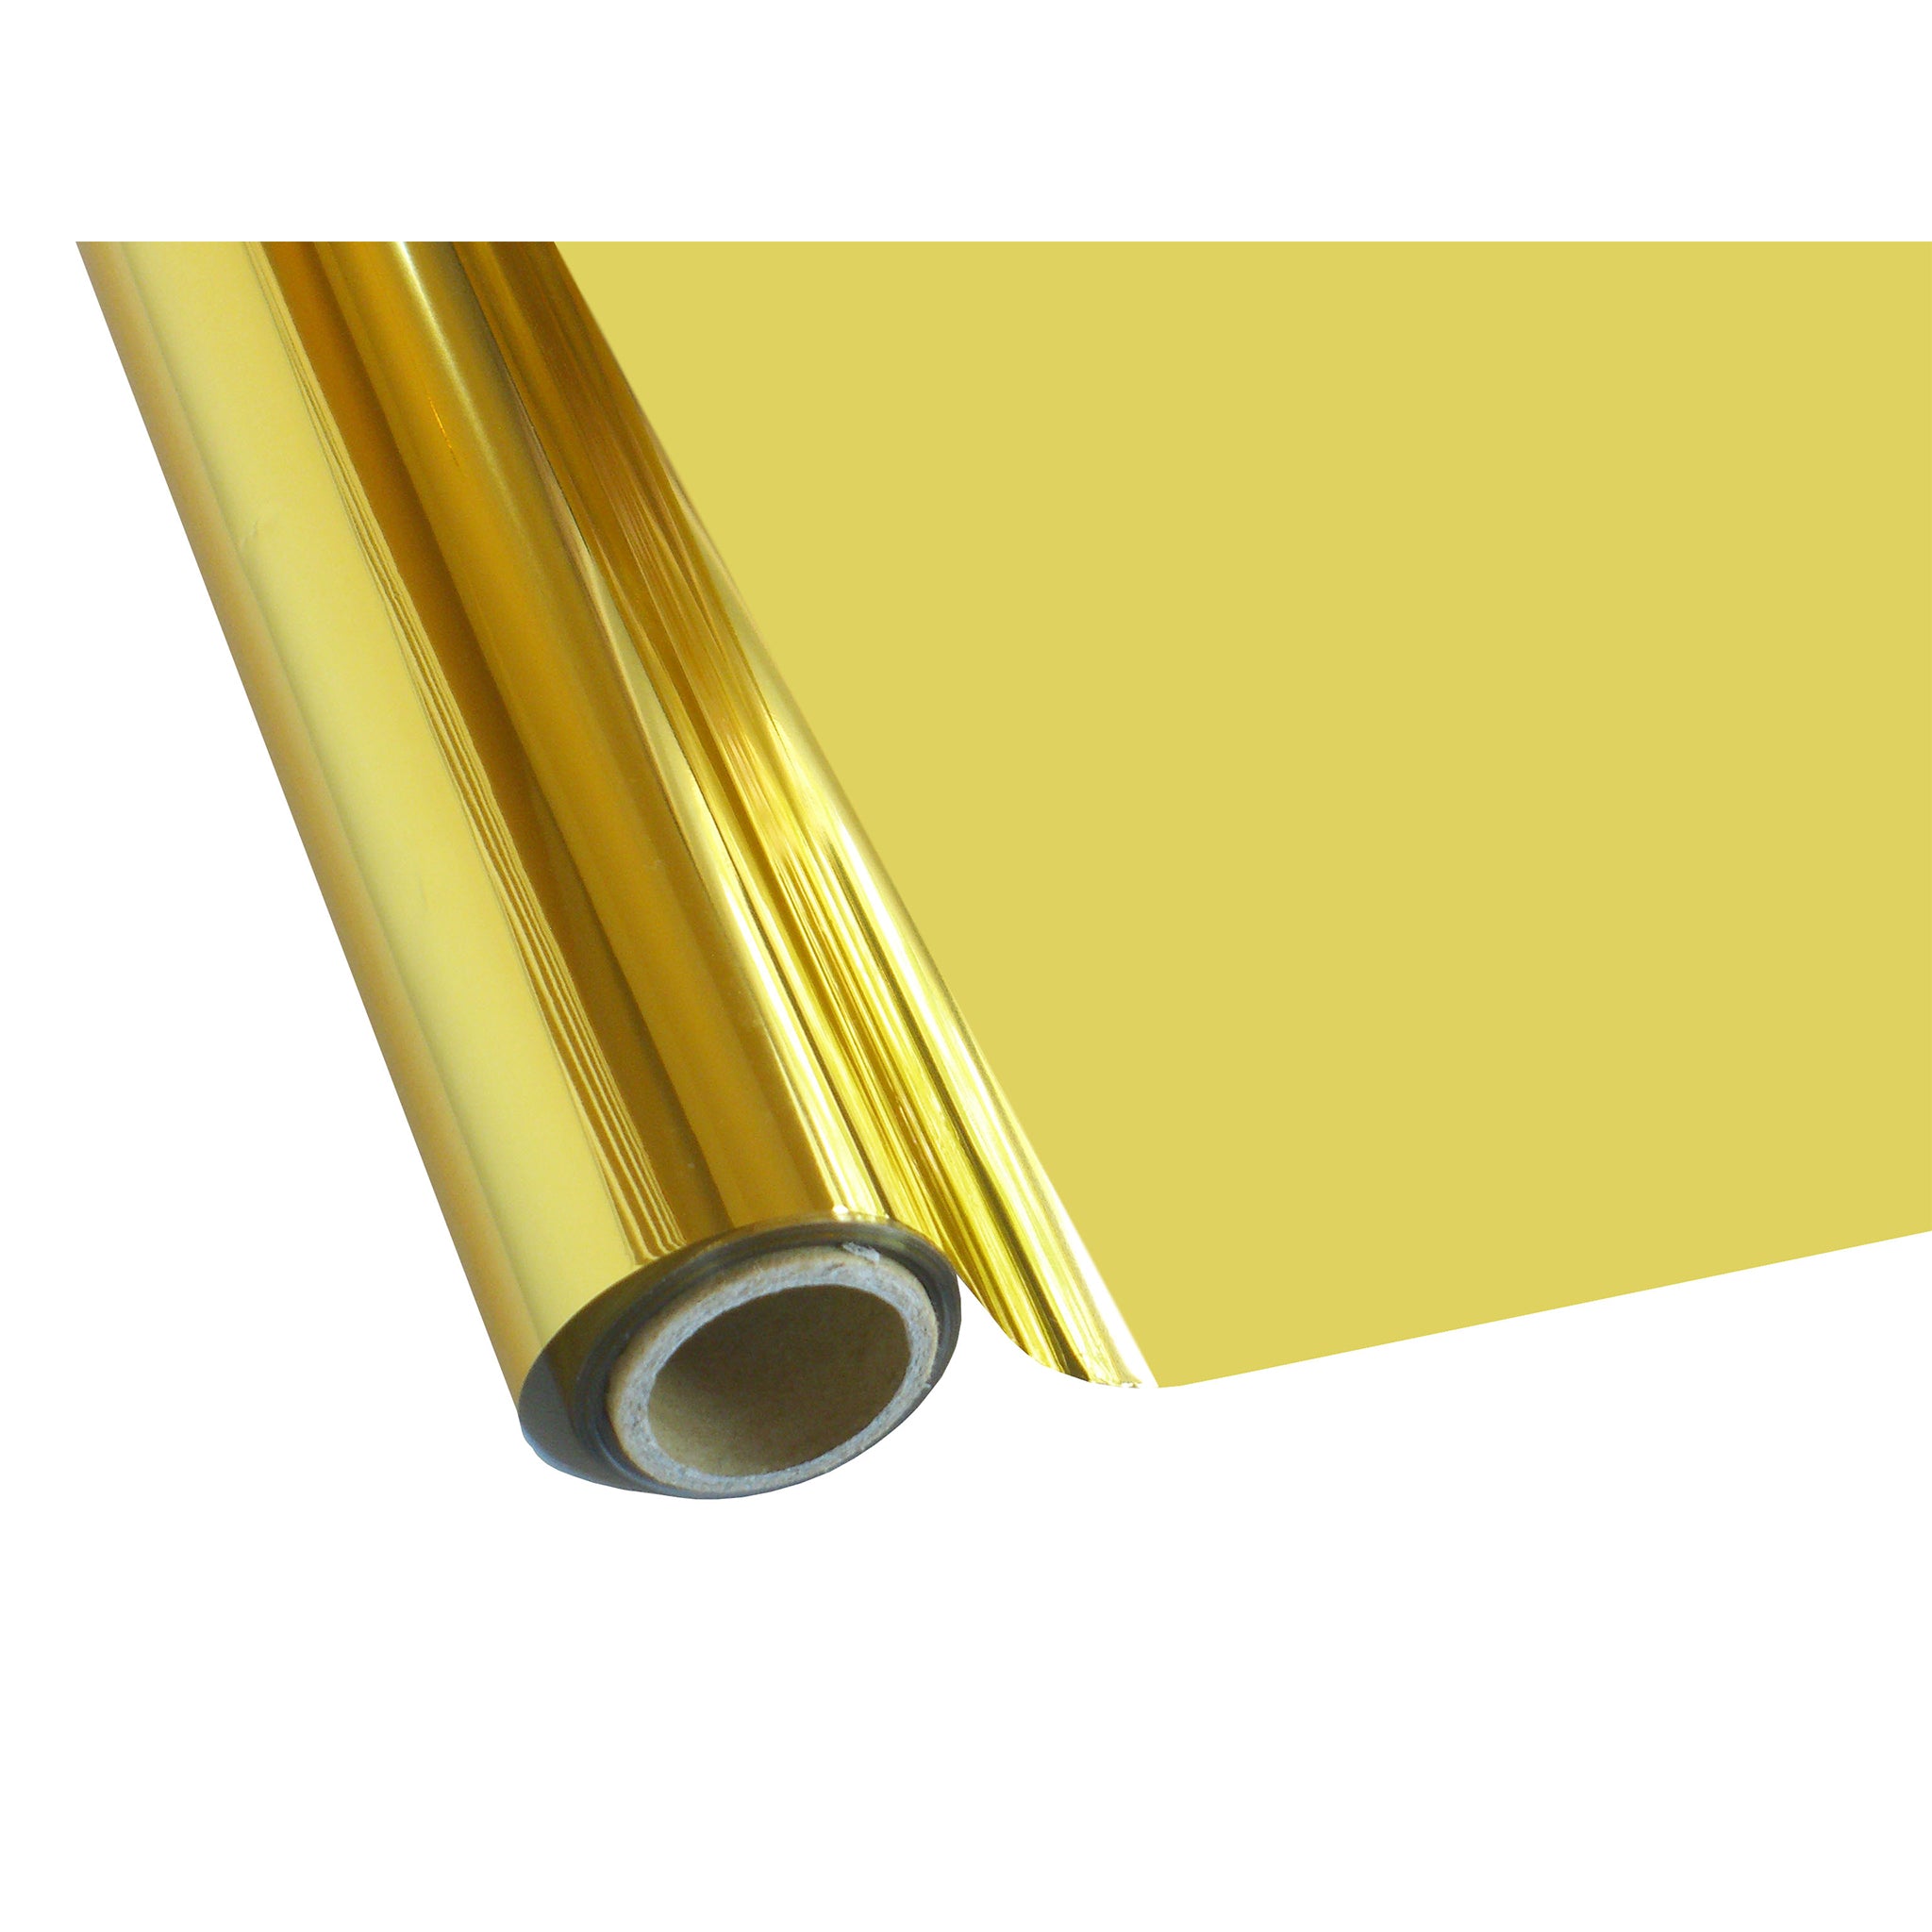 25 Foot Roll of 12" StarCraft Electra Foil - Bright Gold